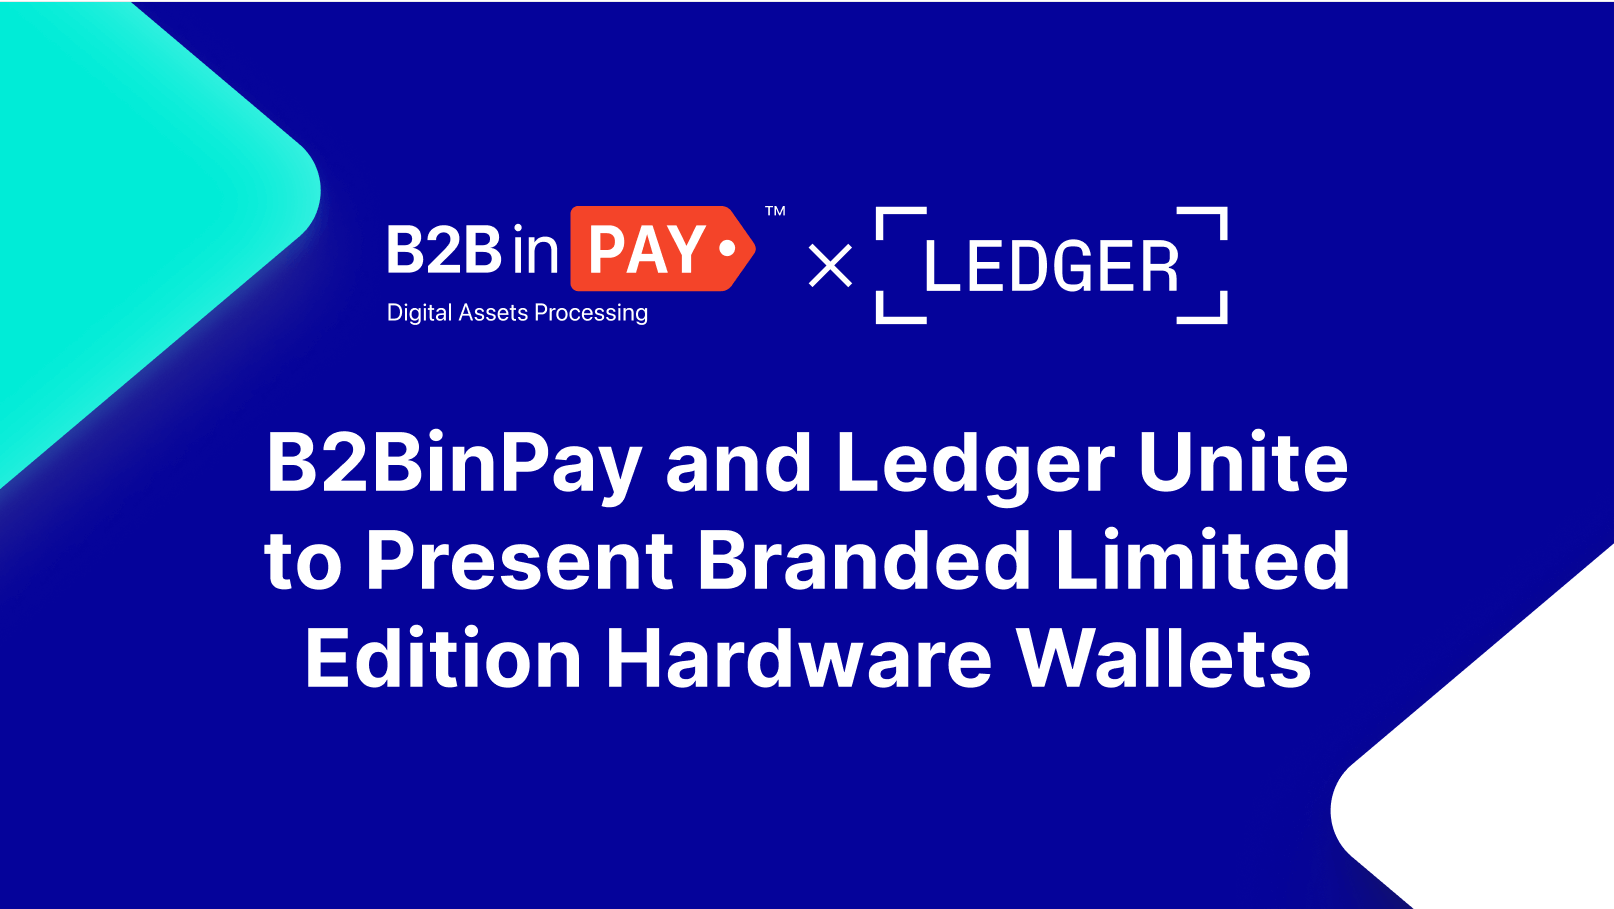 B2BinPay and Ledger Unite To Present Branded Limited Edition Hardware Wallets